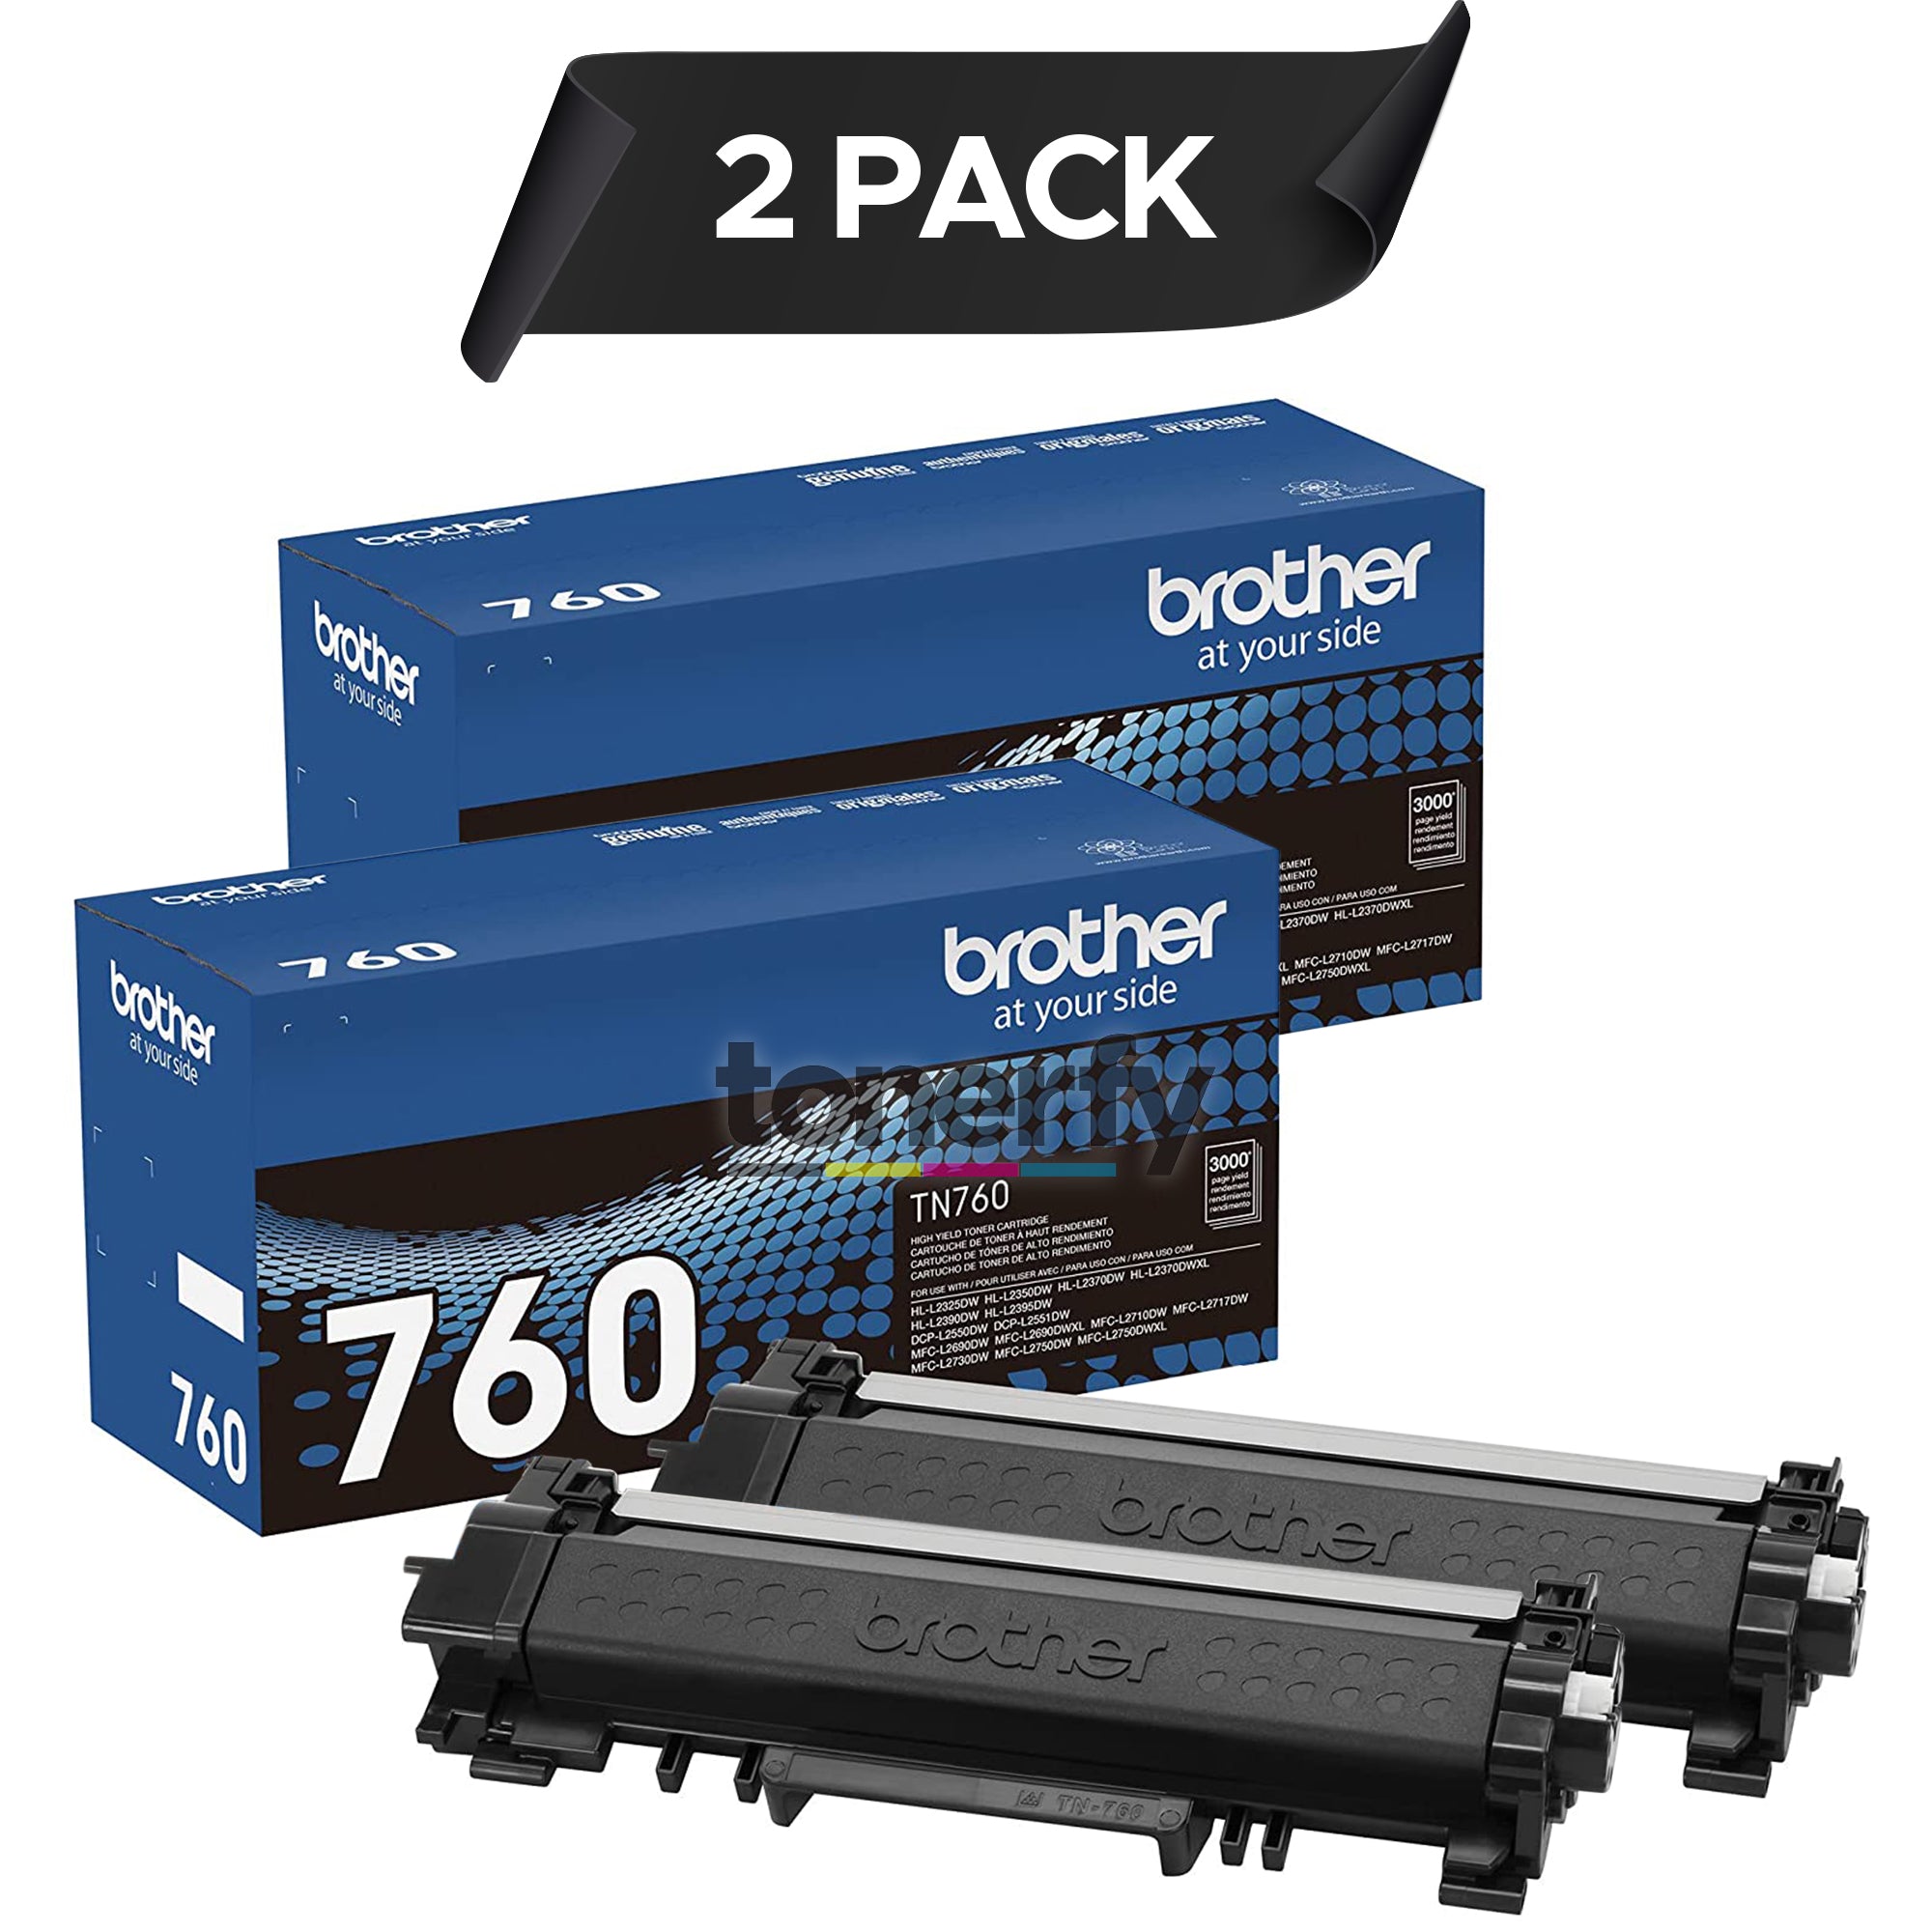 Brother Genuine TN760 2-Pack High Yield Black Toner Cartridge with approximately 3,000 page yield/cartridge